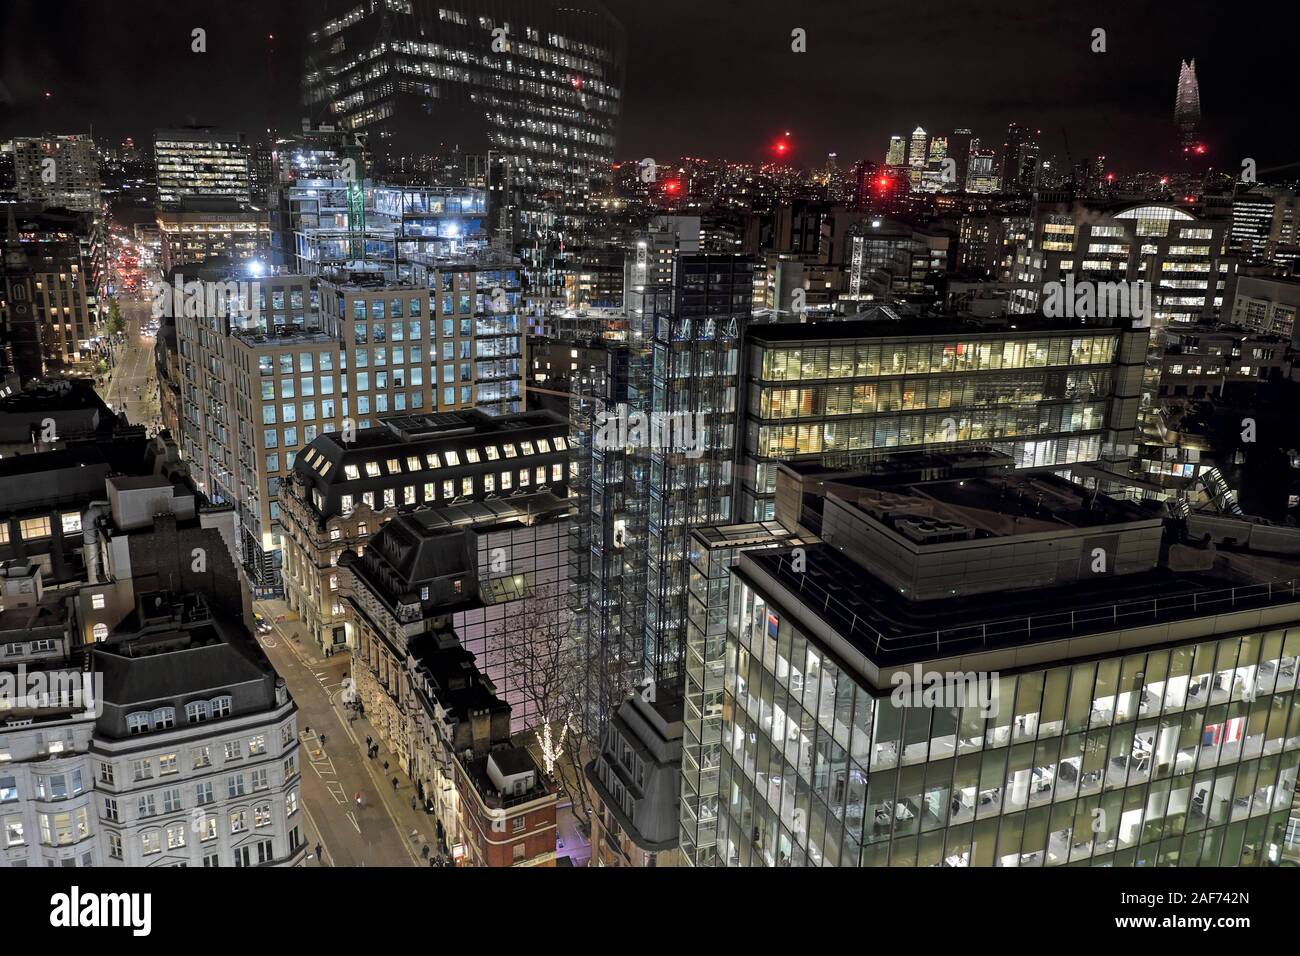 Cityscape view at night looking east of buildings on Fenchurch Street and Whitechapel High Street and the White Chapel building London E1 KATHY DEWITT Stock Photo